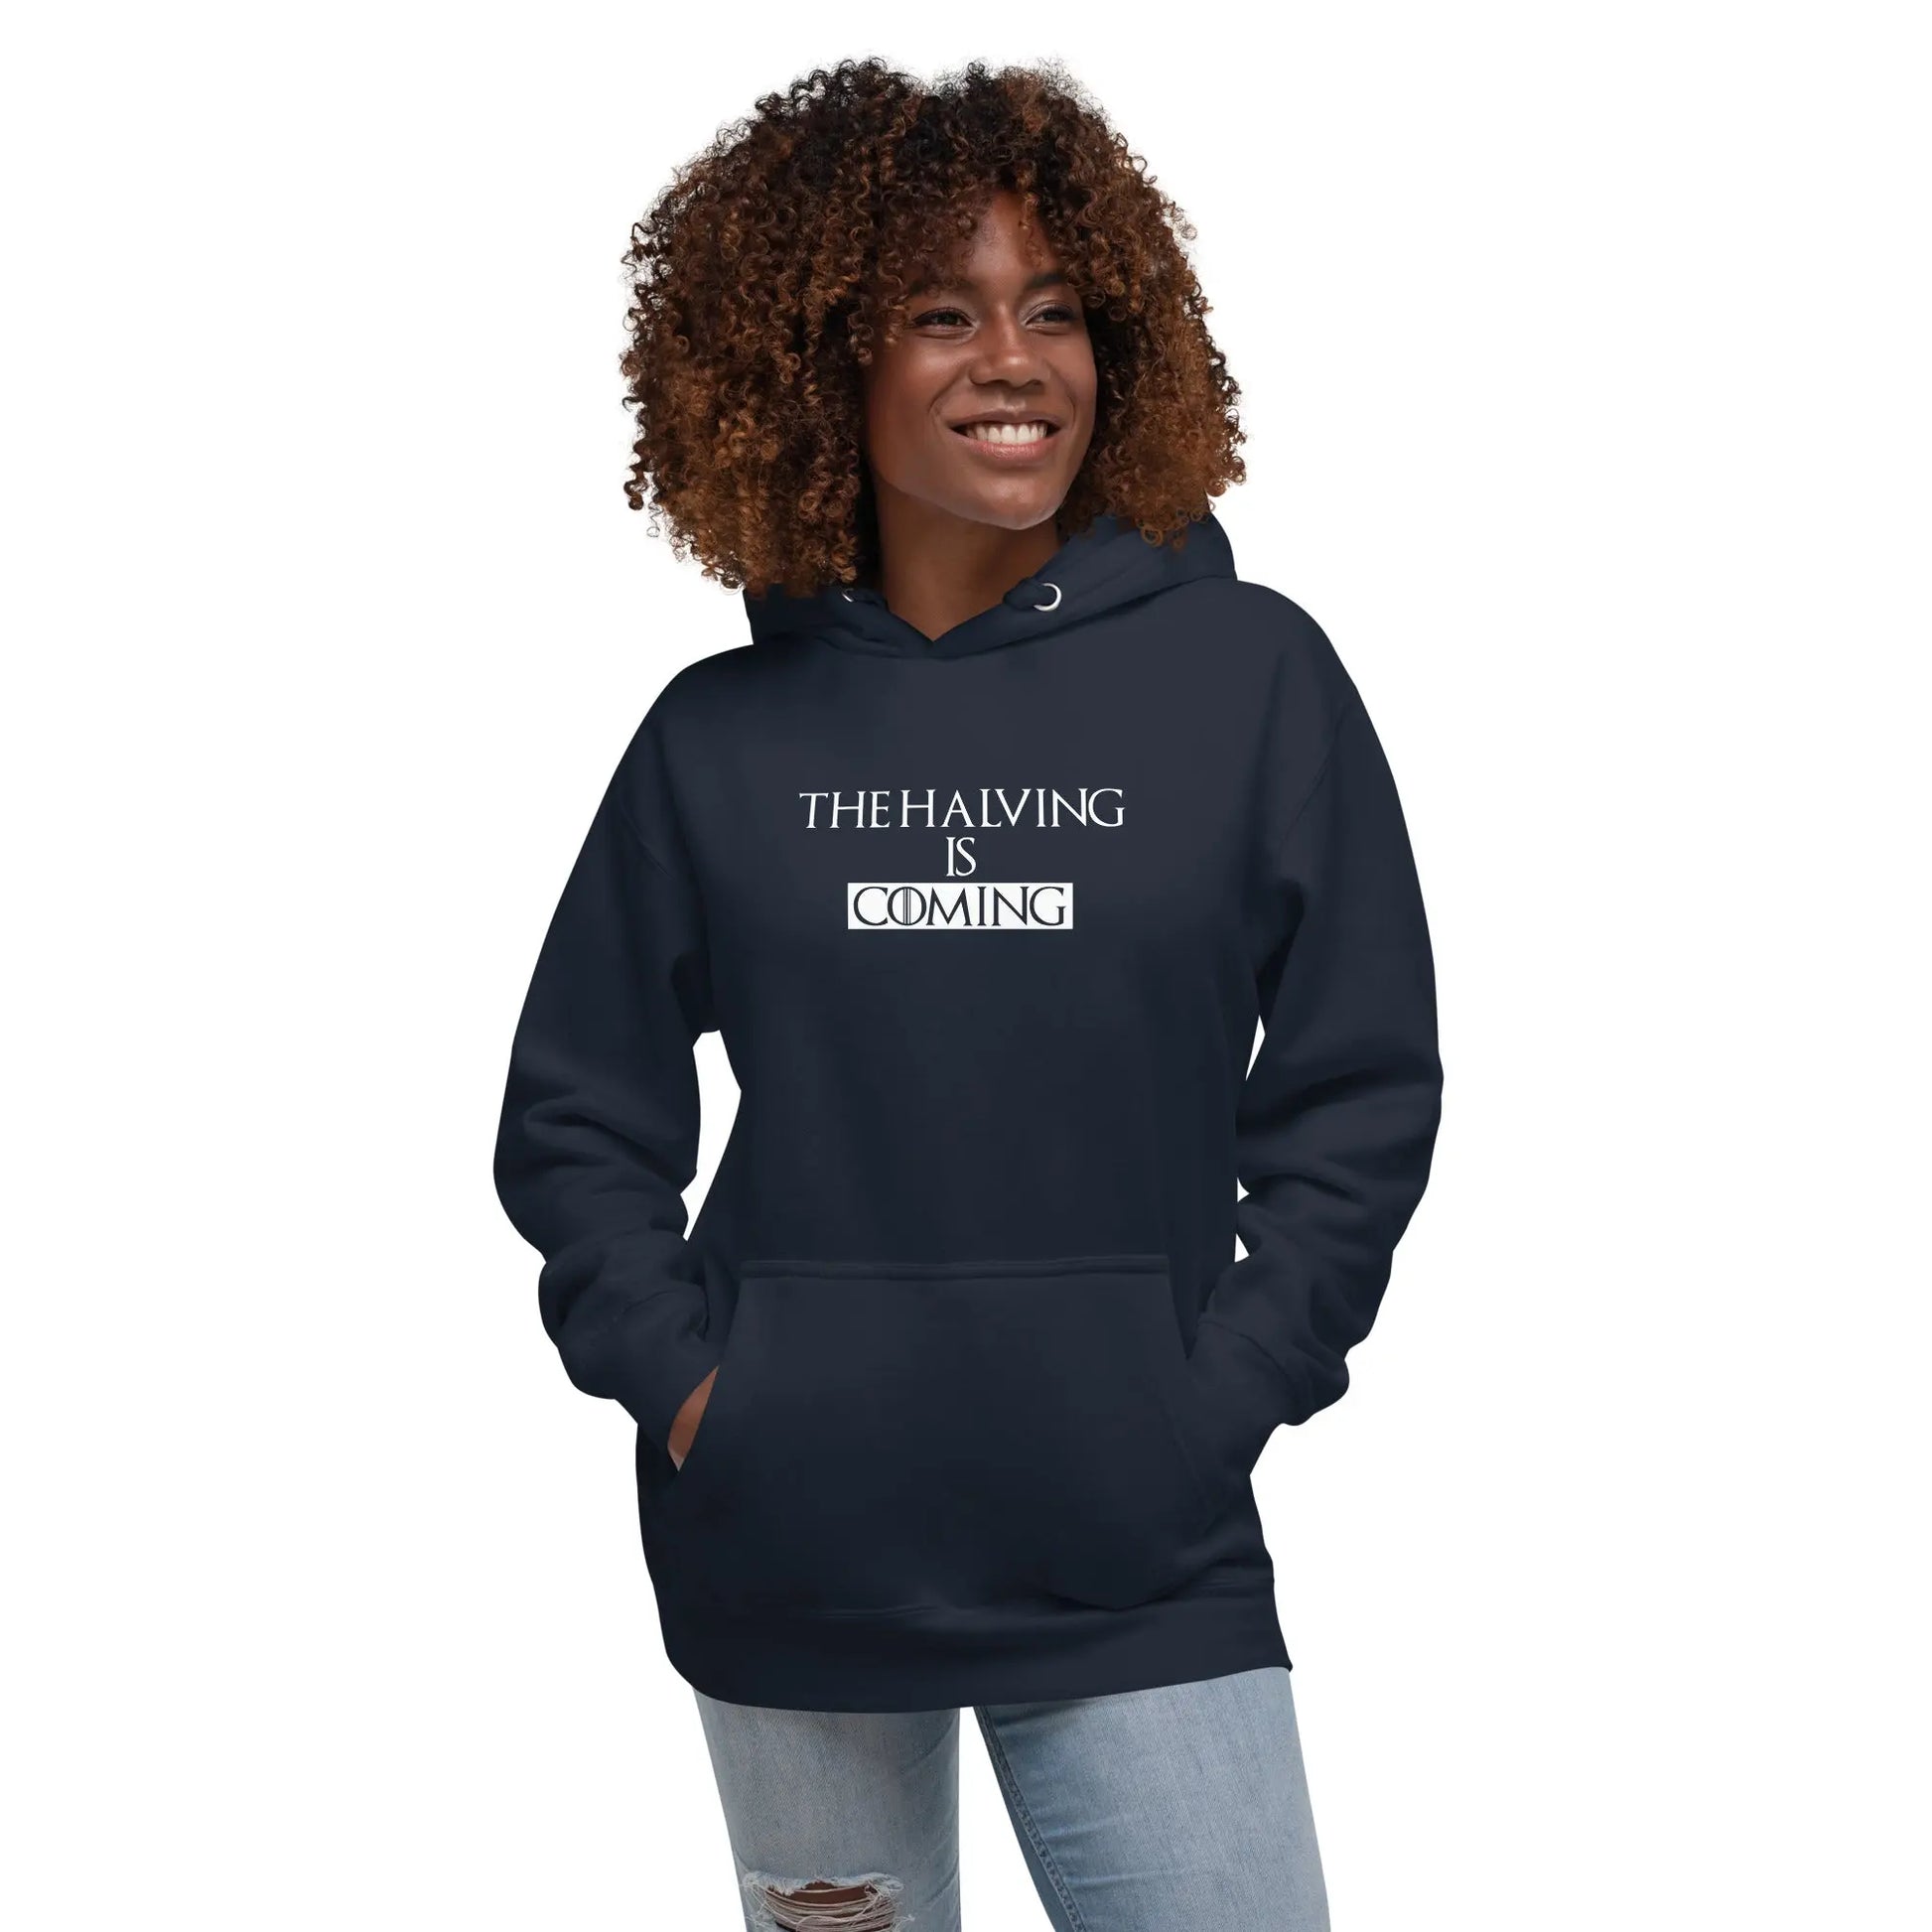 The Halving Is Coming - Premium Unisex Bitcoin Hoodie Navy Blue Color